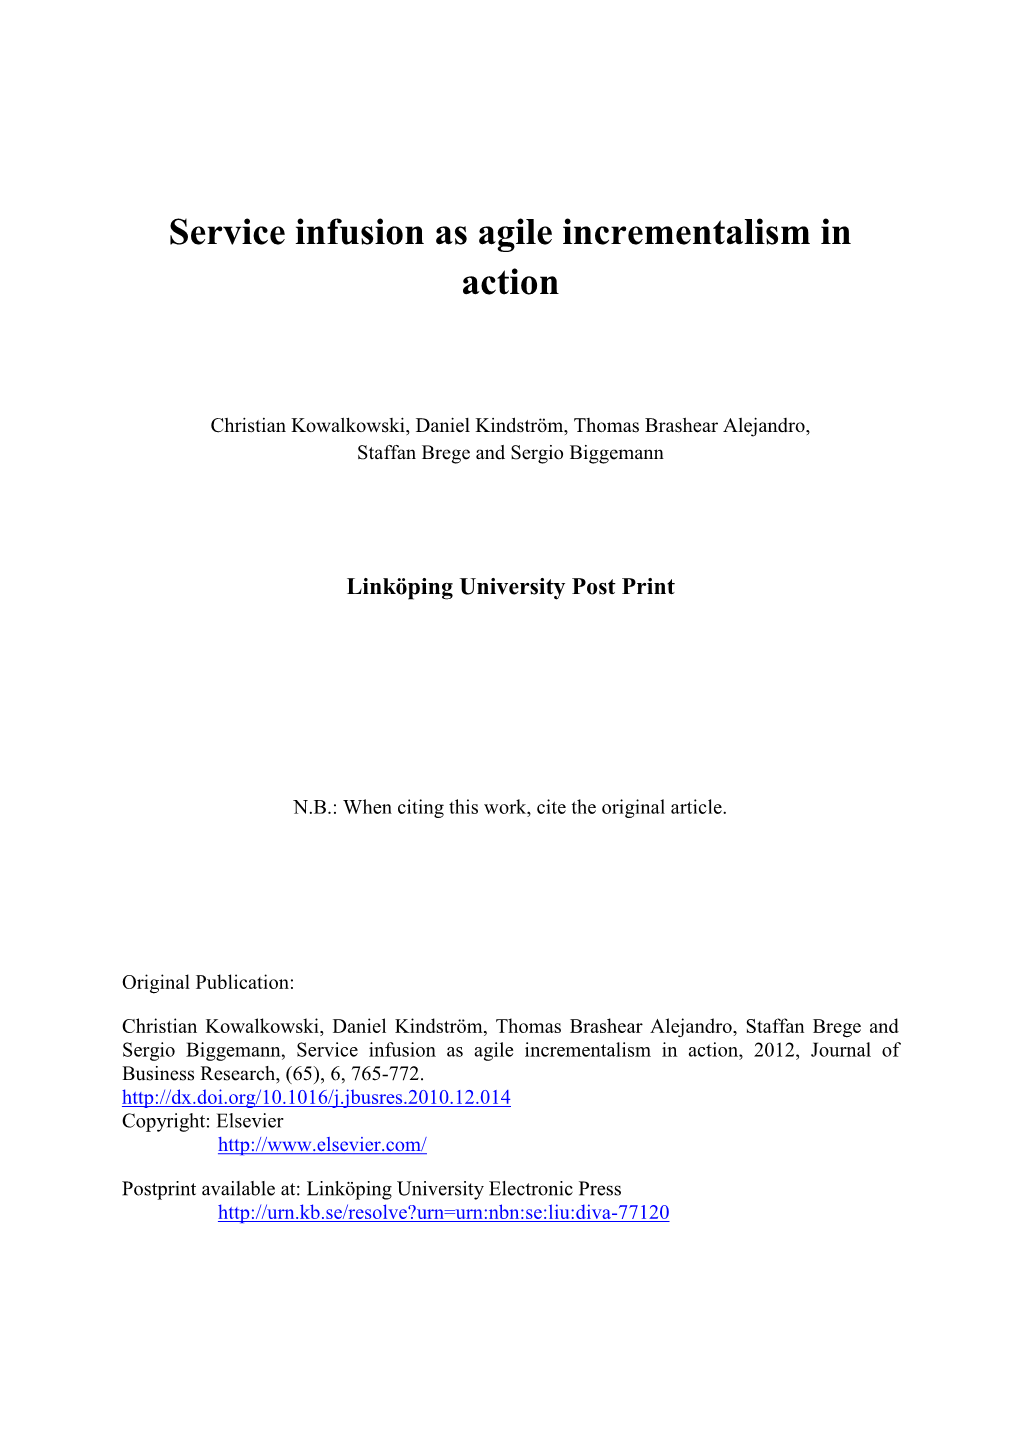 Service Infusion As Agile Incrementalism in Action